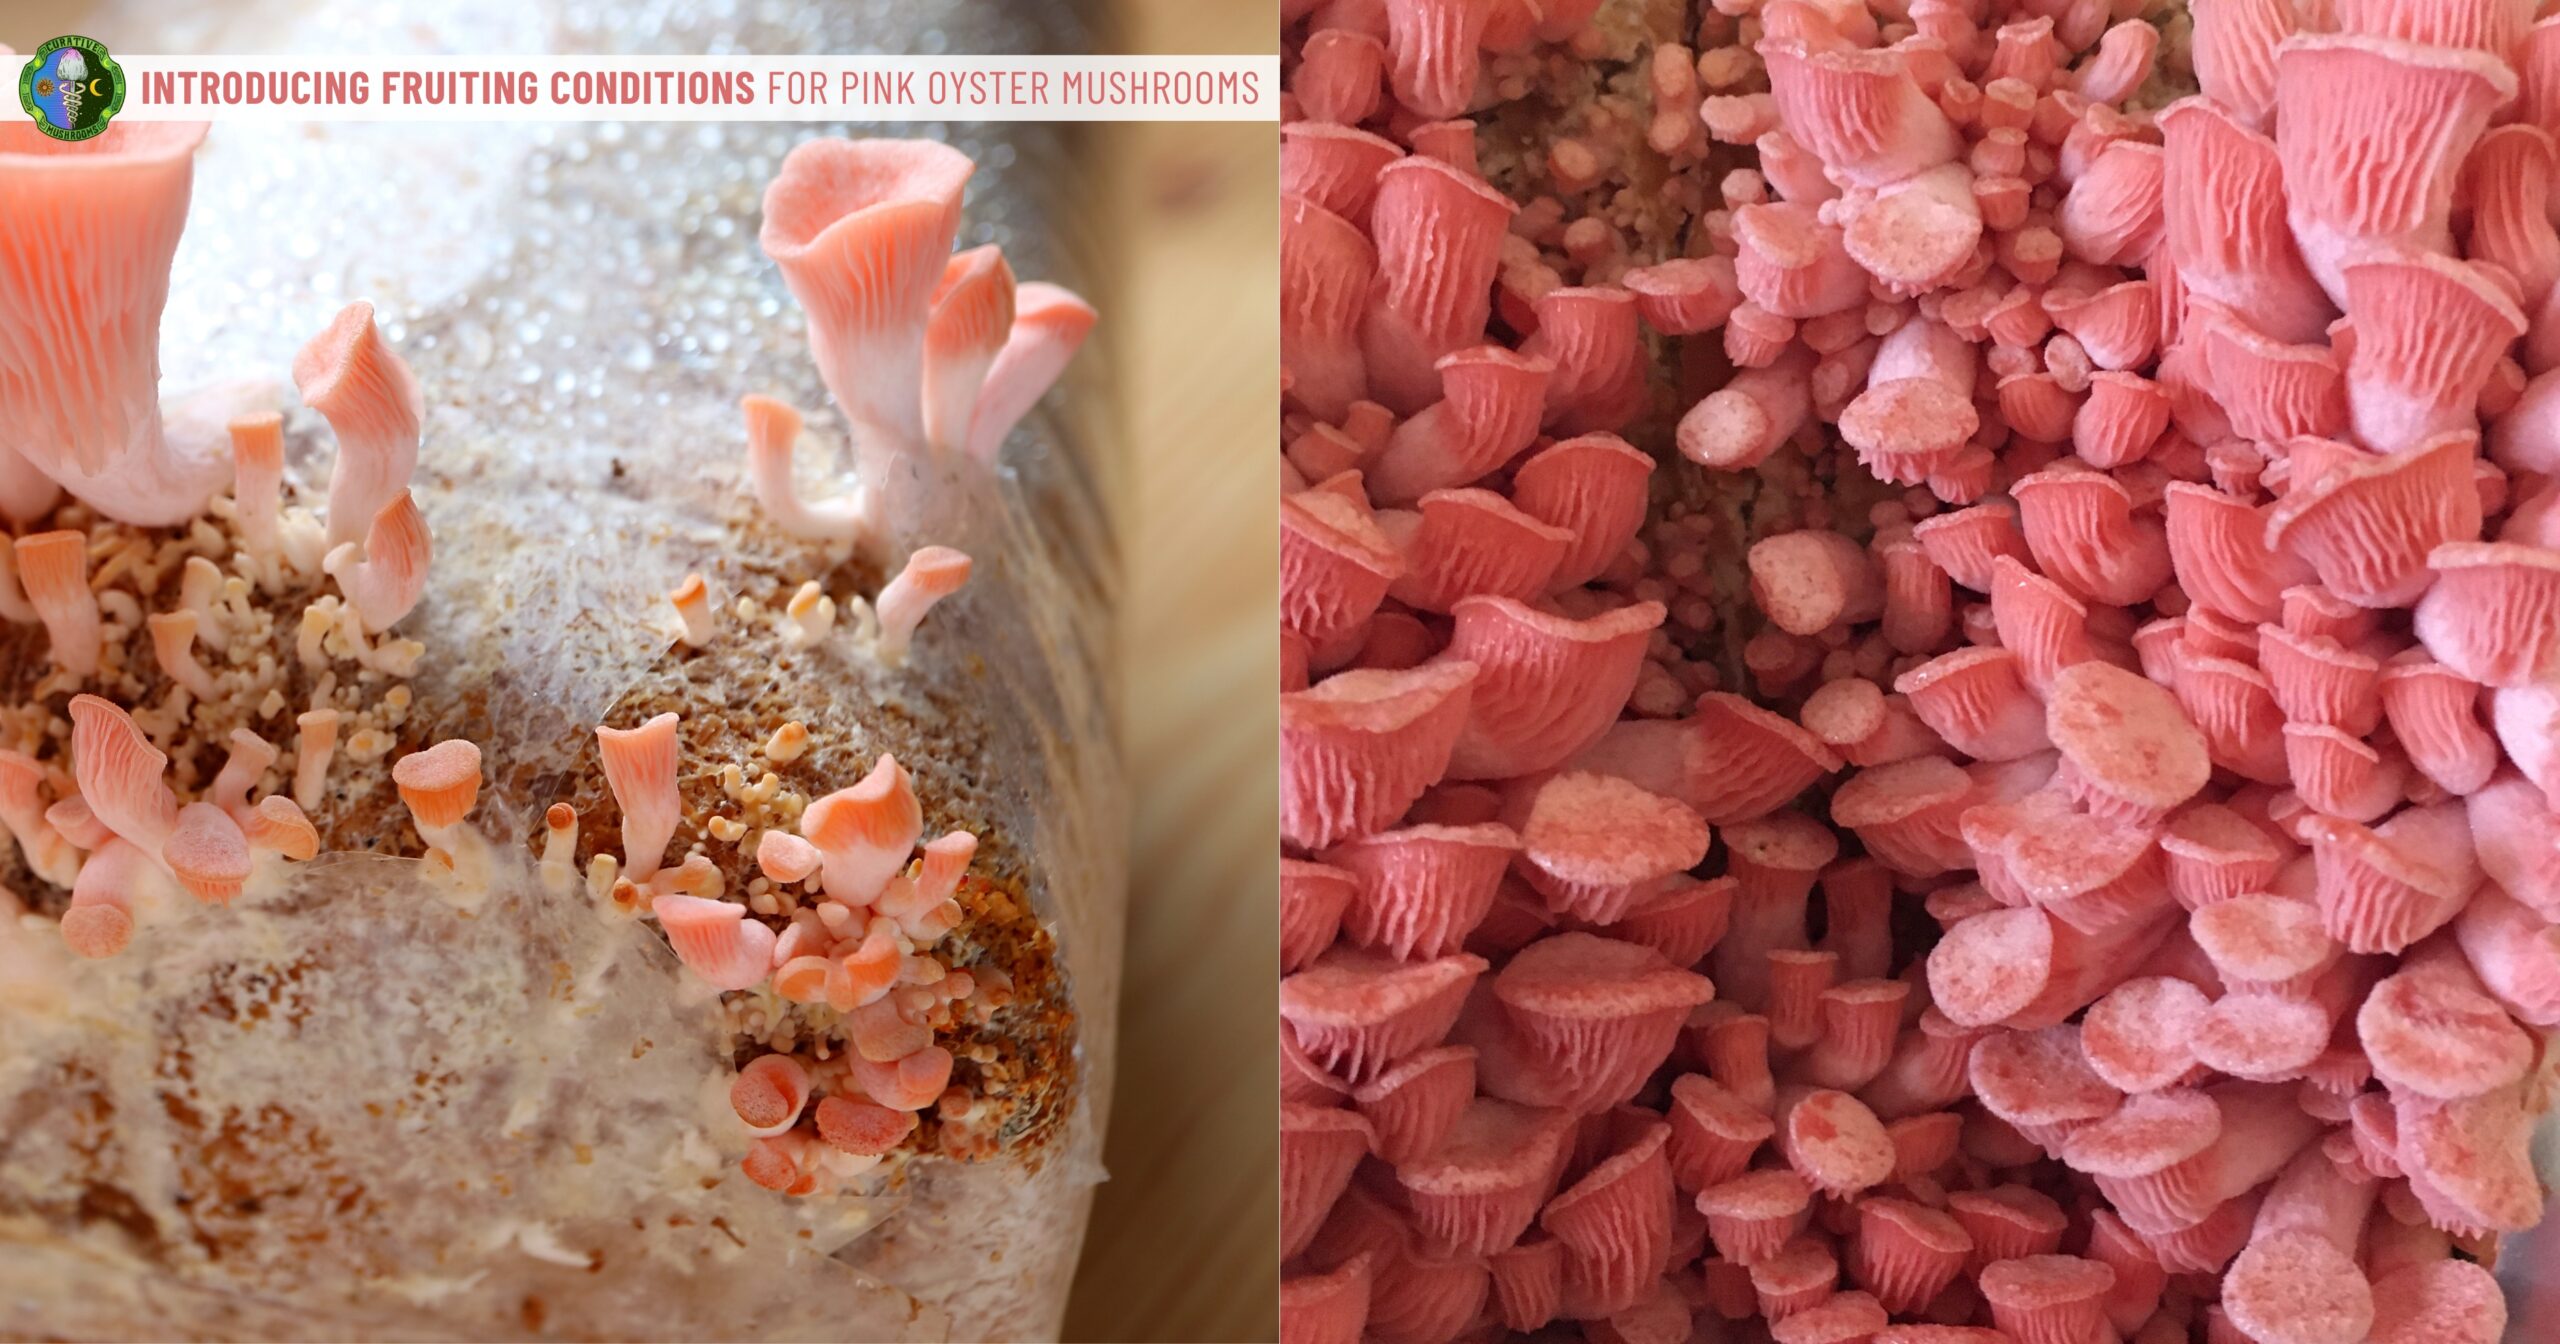 Introducing Fruiting Conditions for Pink Oyster Mushrooms - Pinning, Tiny Pins, Primordia